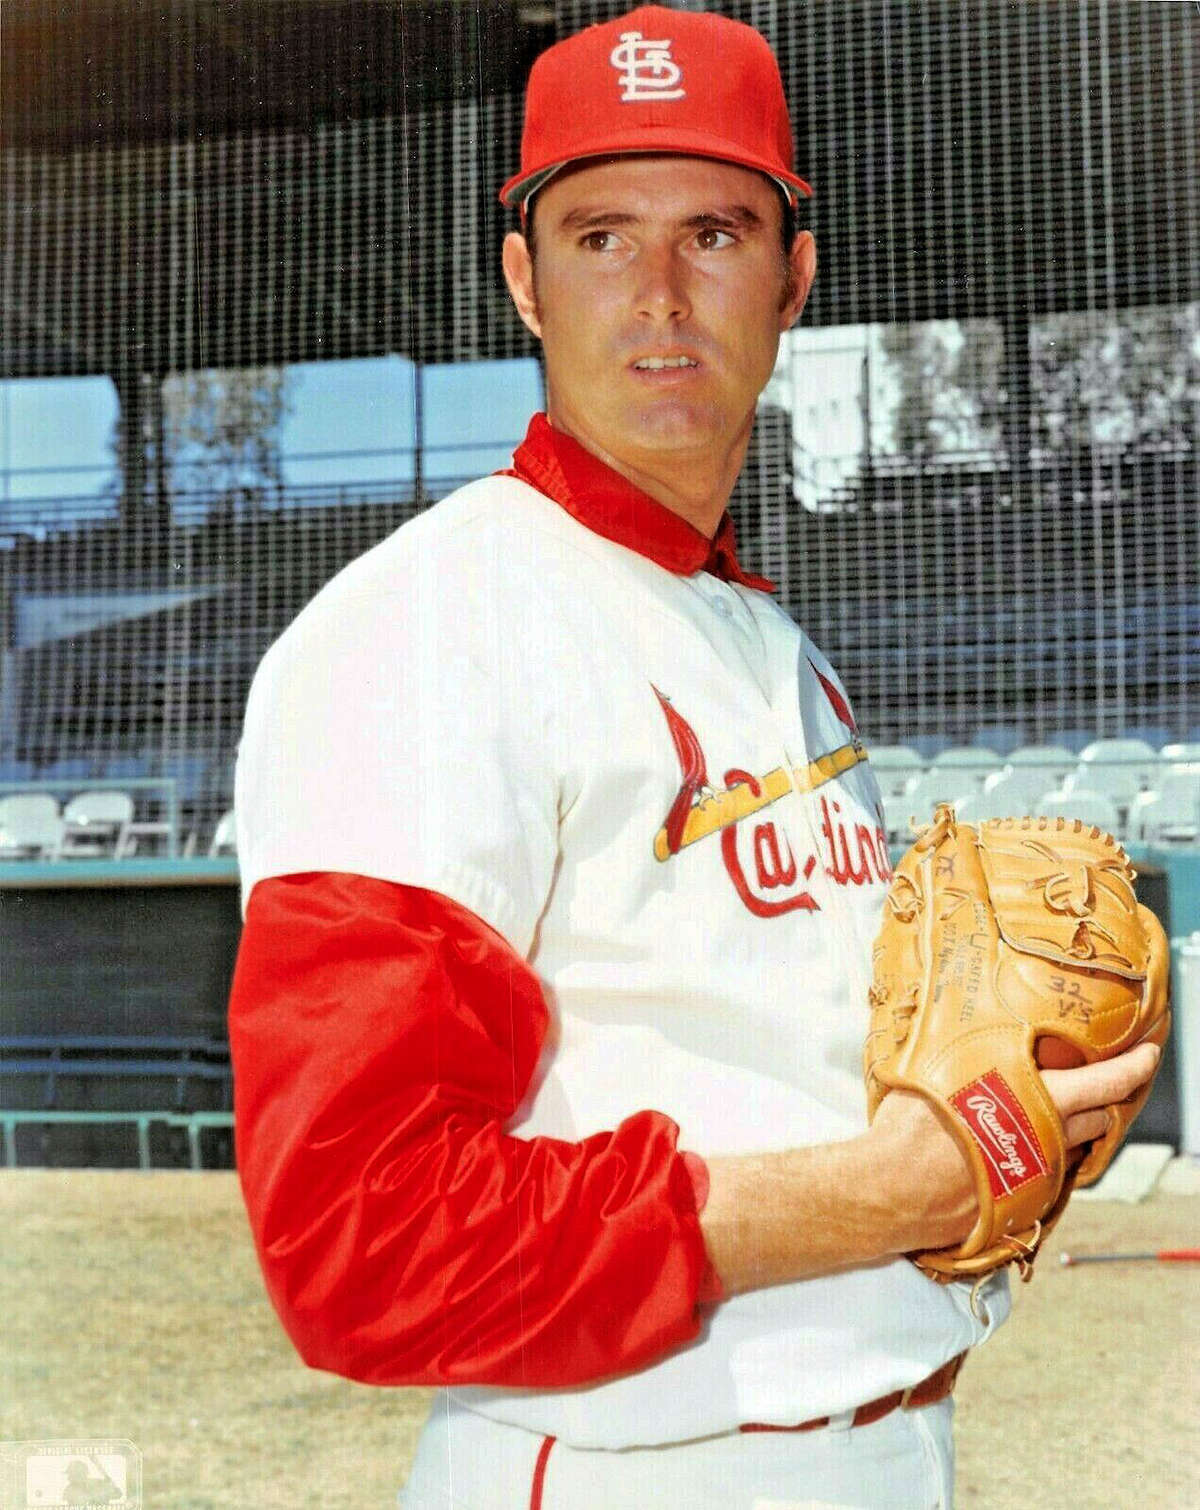 Former Cardinals pitcher Steve Carlton is one of this year's nominees for the Cardinals Hall of Fame.